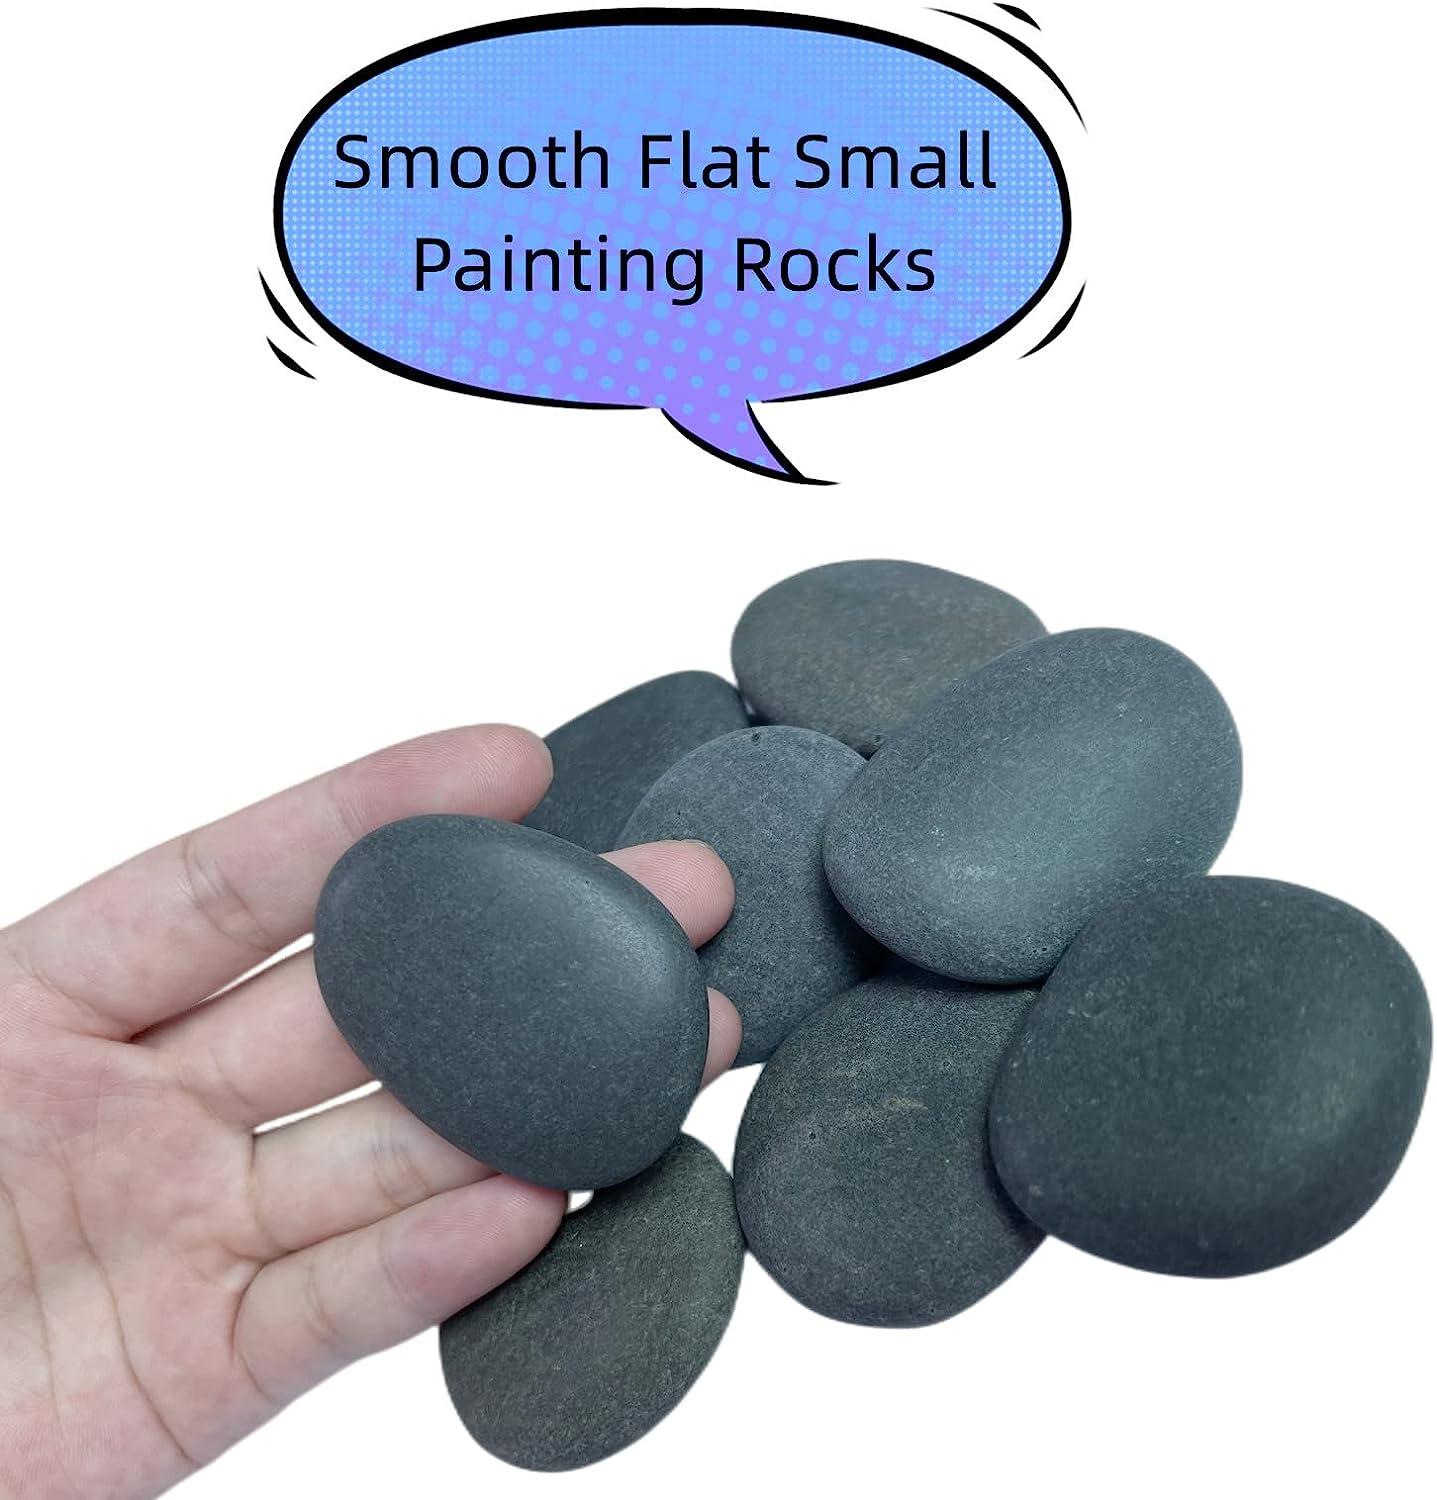 Lifetop 120PCS Painting Rocks, DIY Rocks Flat & Smooth Kindness Rocks for  Arts, Crafts, Decoration, Medium/Small/Tiny Rocks for Painting,Hand Picked  for Painting Rocks 